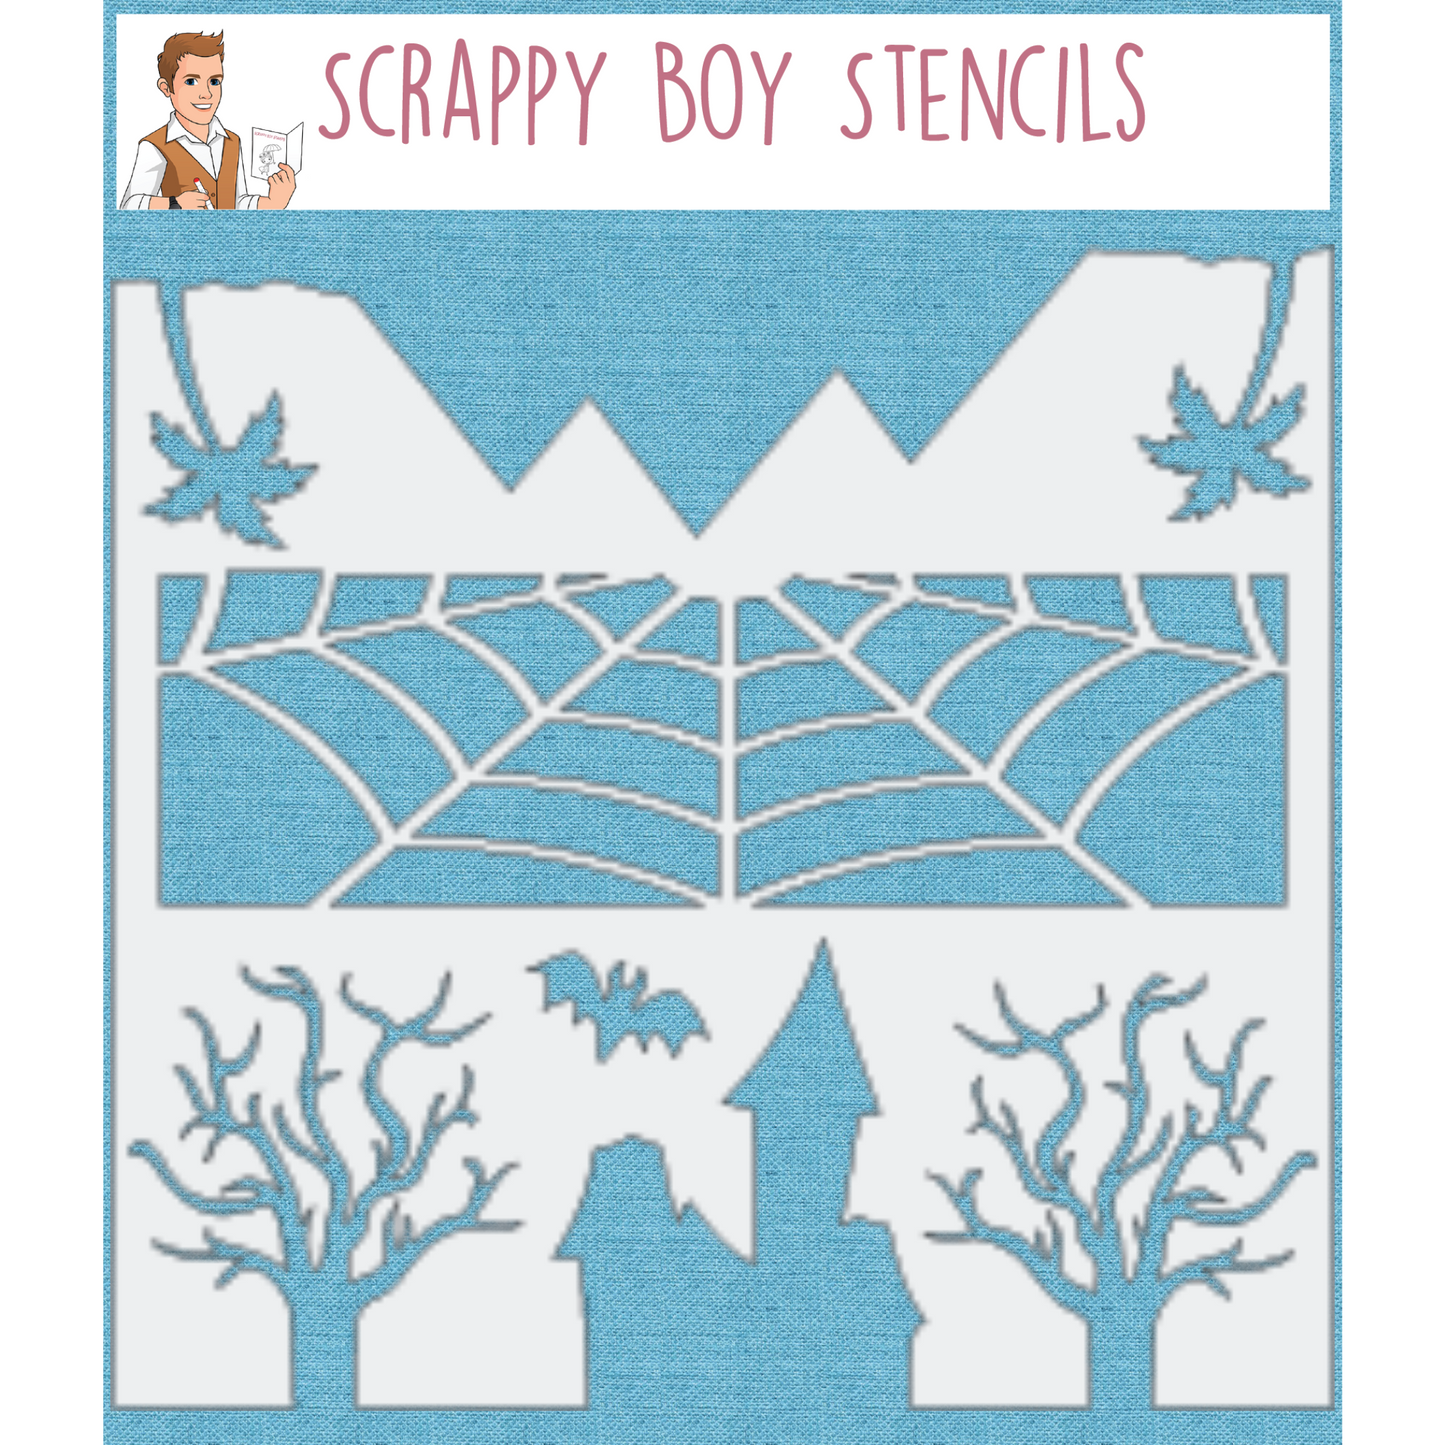 
                  
                    Core Bundle - Halloween Pin Up Girls Release Scrappy Boy Stamps
                  
                